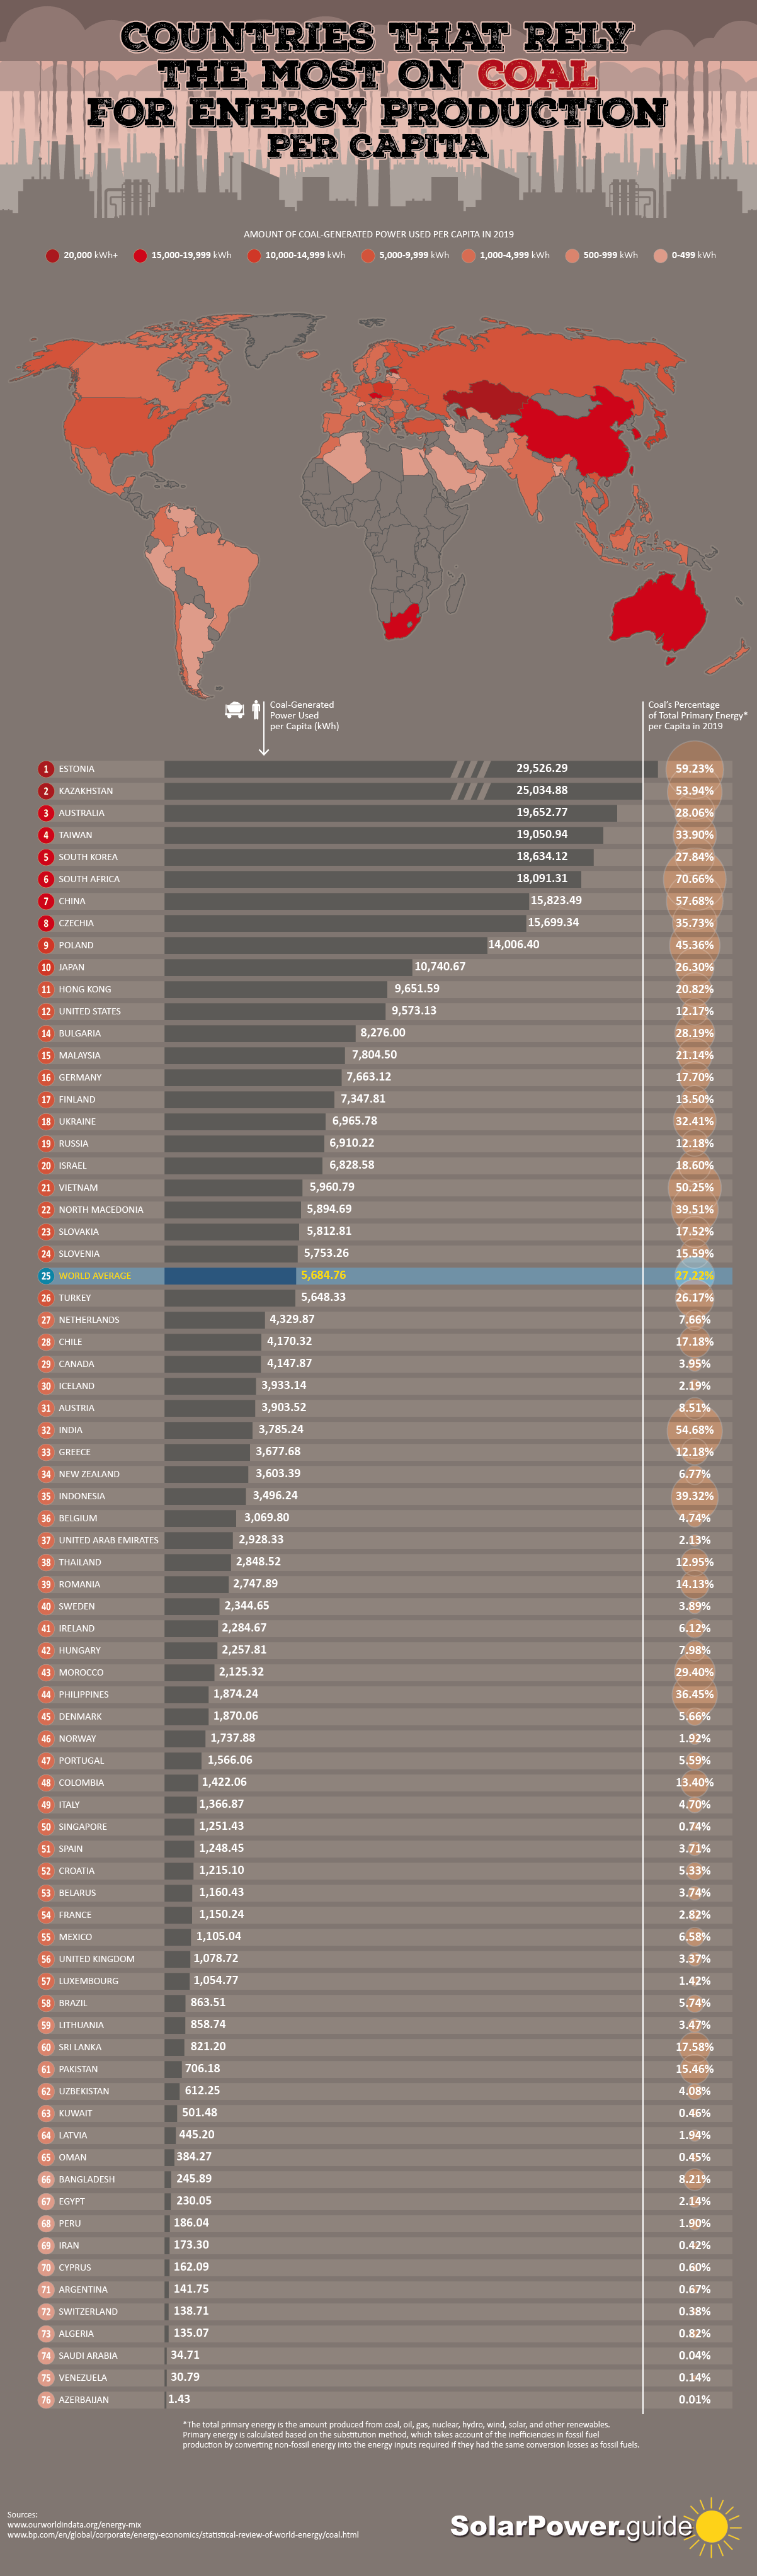 Countries That Rely the Most on Coal for Energy Production per Capita - Solar Power Guide and Solar Energy Insights - Infographic